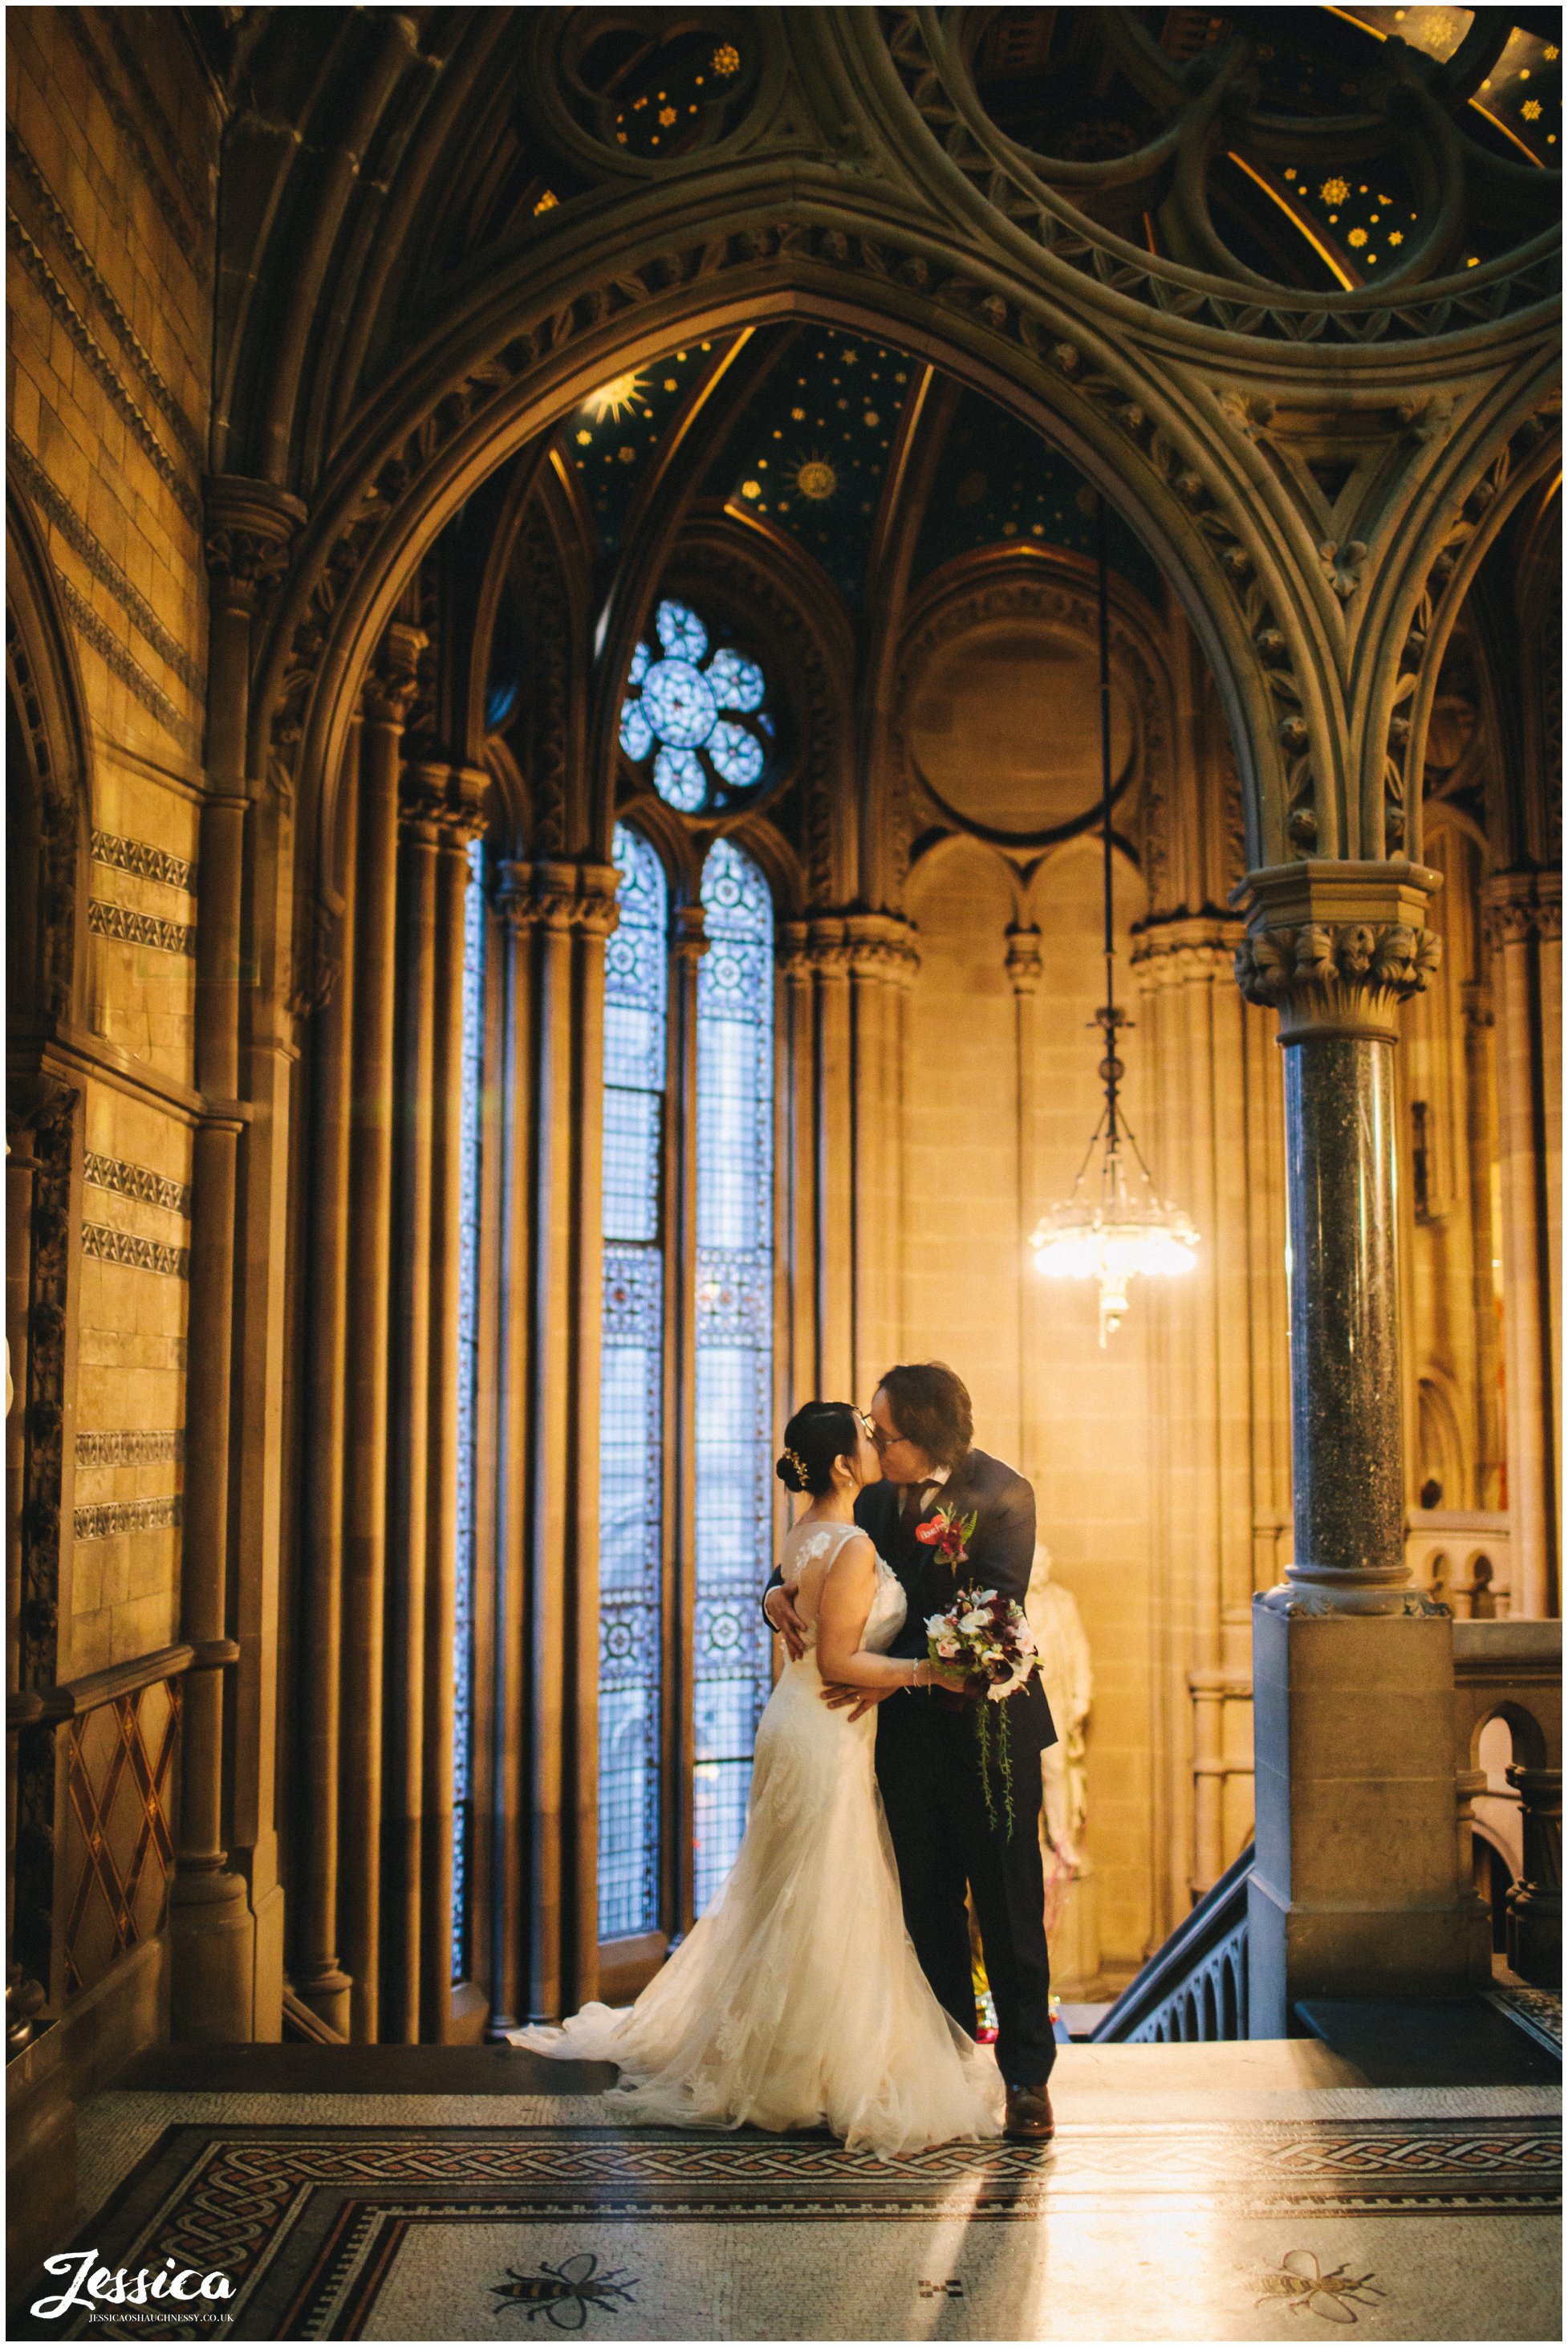 newly wed's kiss on the stairs of manchester town hall in the evening